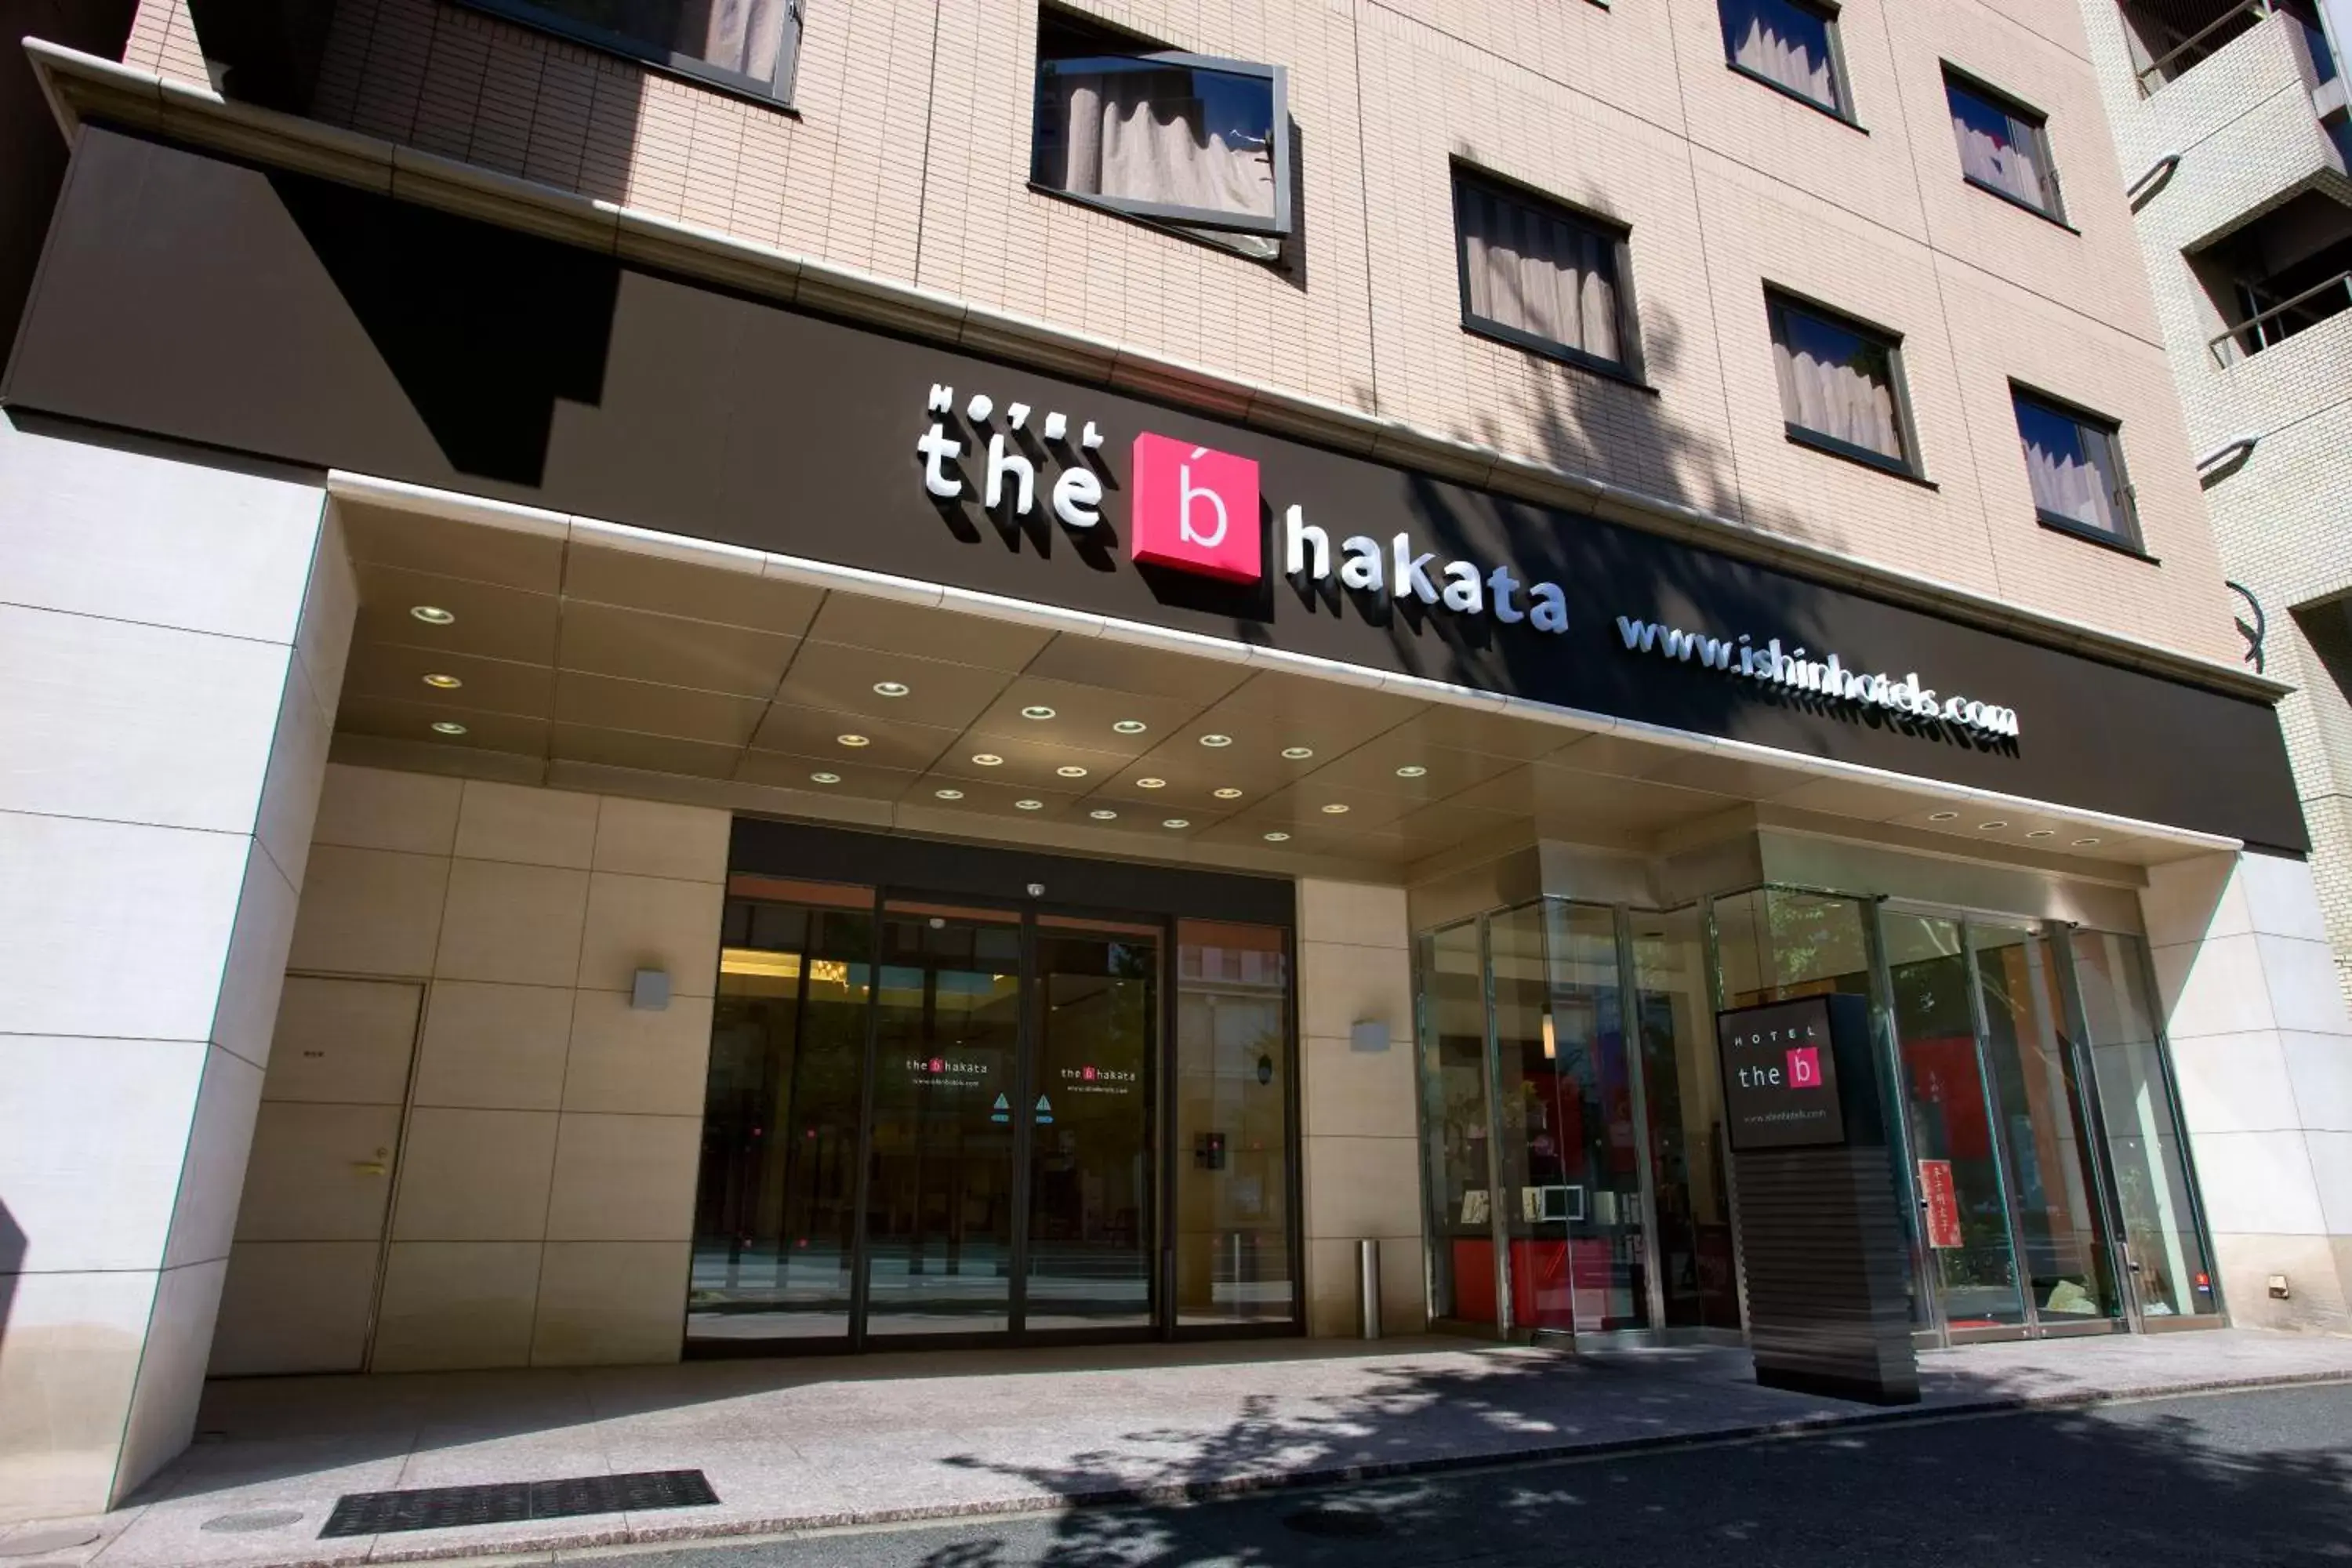 Property building in the b hakata